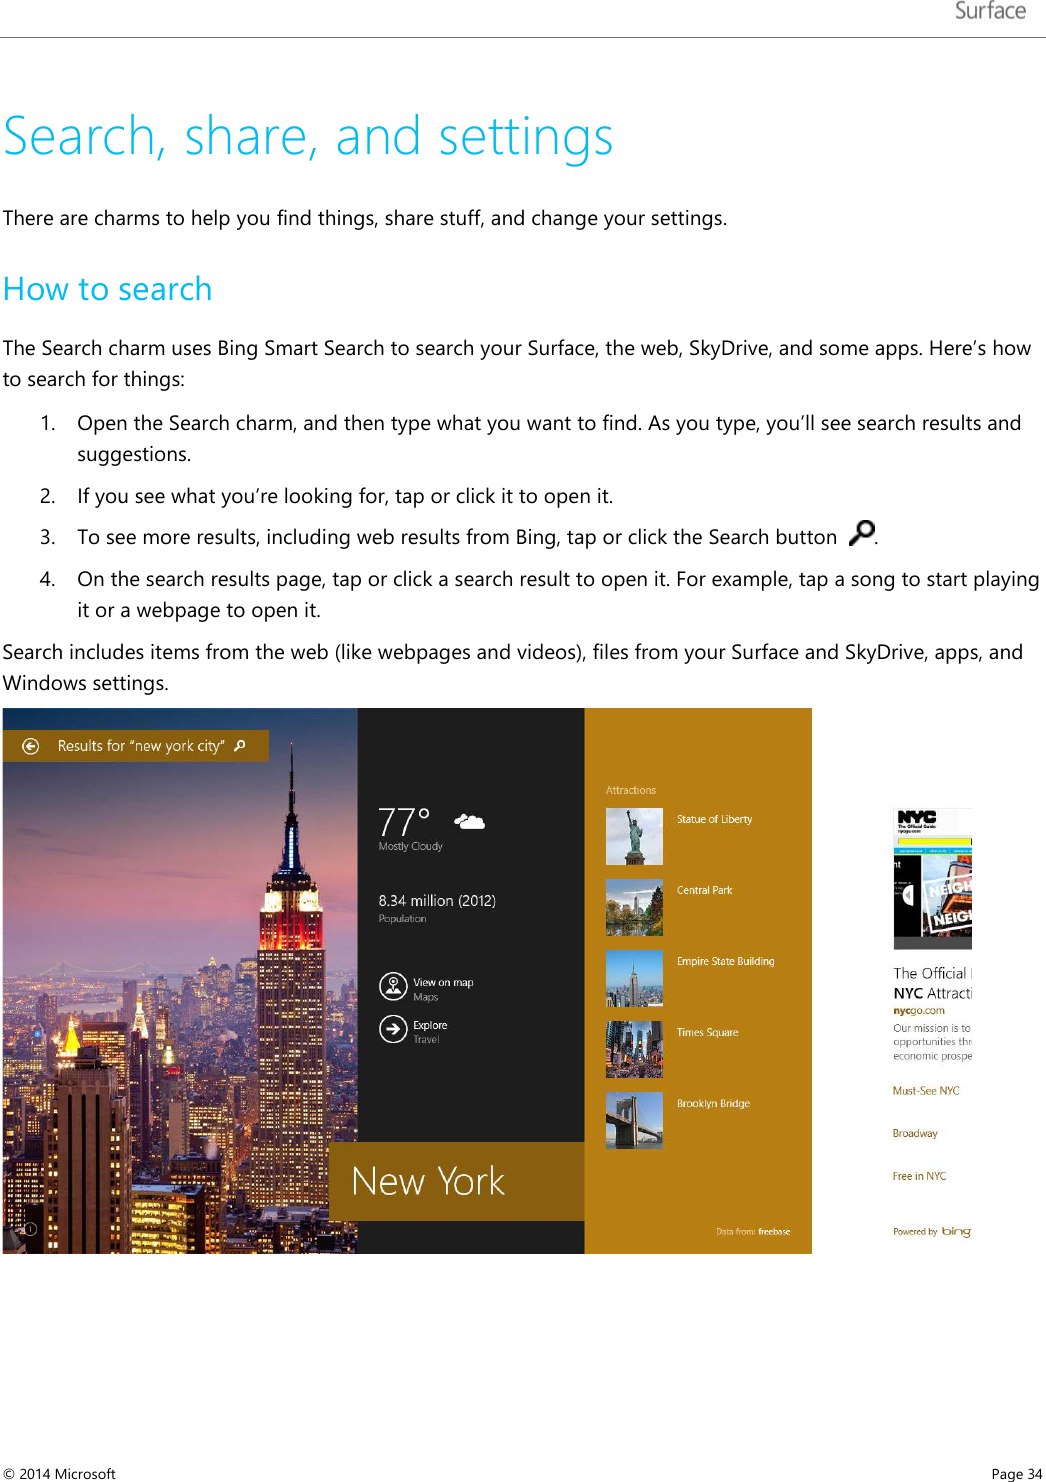   Search, share, and settings There are charms to help you find things, share stuff, and change your settings.  How to search The Search charm uses Bing Smart Search to search your Surface, the web, SkyDrive, and some apps. Here’s how to search for things: 1. Open the Search charm, and then type what you want to find. As you type, you’ll see search results and suggestions.  2. If you see what you’re looking for, tap or click it to open it.  3. To see more results, including web results from Bing, tap or click the Search button   . 4. On the search results page, tap or click a search result to open it. For example, tap a song to start playing it or a webpage to open it. Search includes items from the web (like webpages and videos), files from your Surface and SkyDrive, apps, and Windows settings.   © 2014 Microsoft     Page 34  